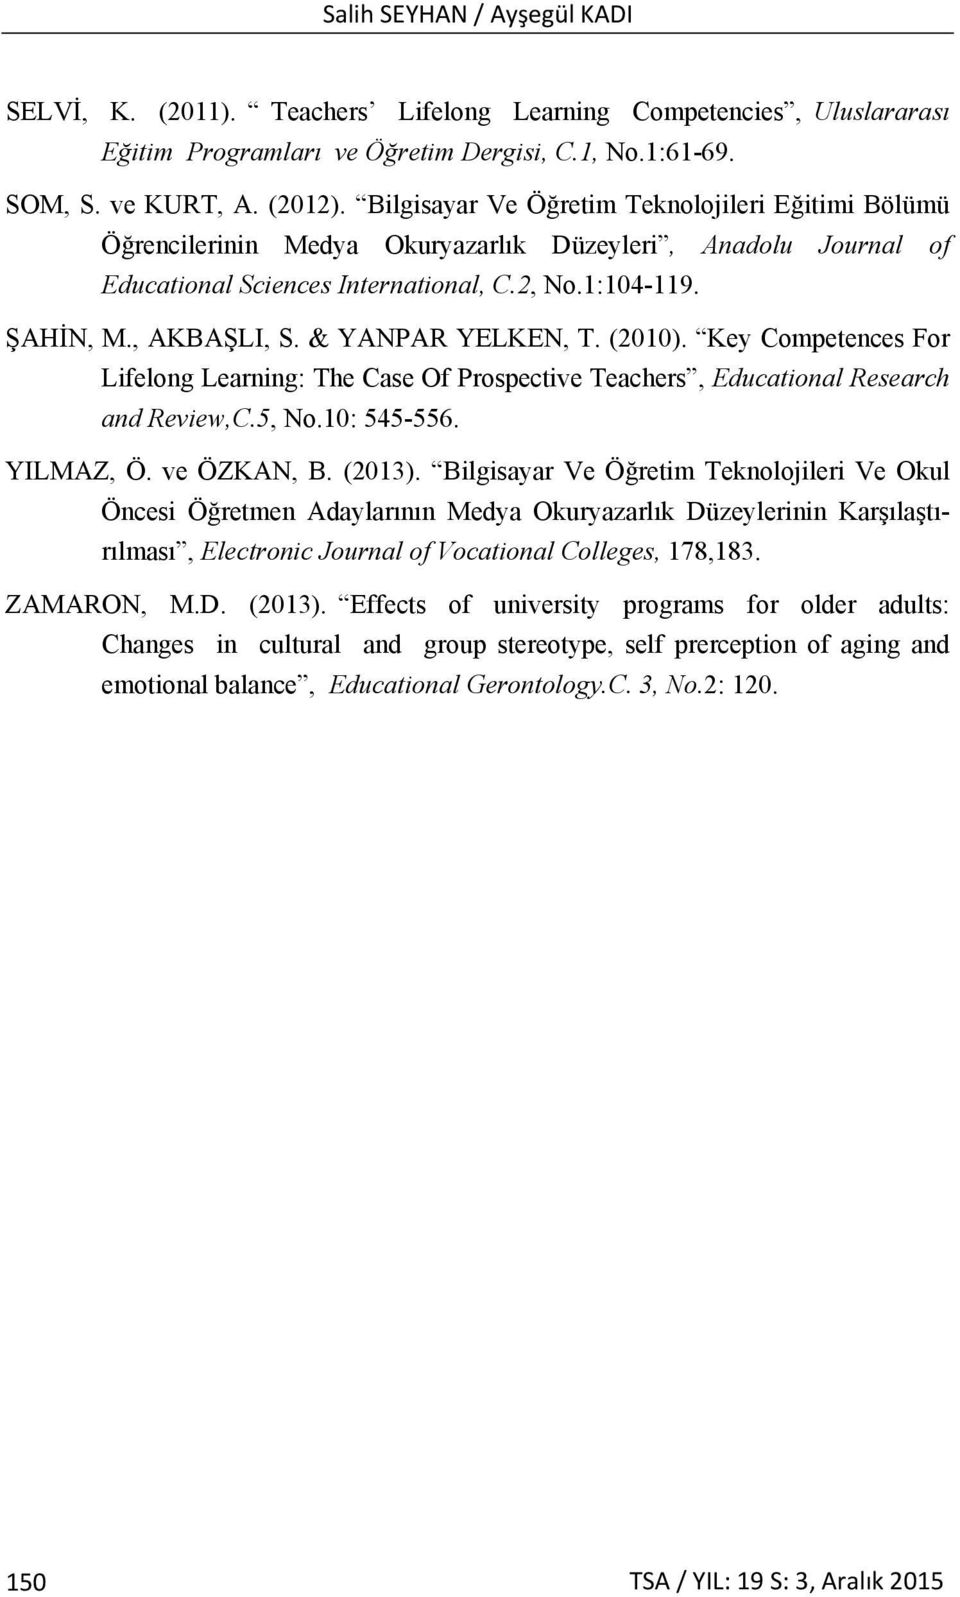 & YANPAR YELKEN, T. (2010). Key Competences For Lifelong Learning: The Case Of Prospective Teachers, Educational Research and Review,C.5, No.10: 545-556. YILMAZ, Ö. ve ÖZKAN, B. (2013).